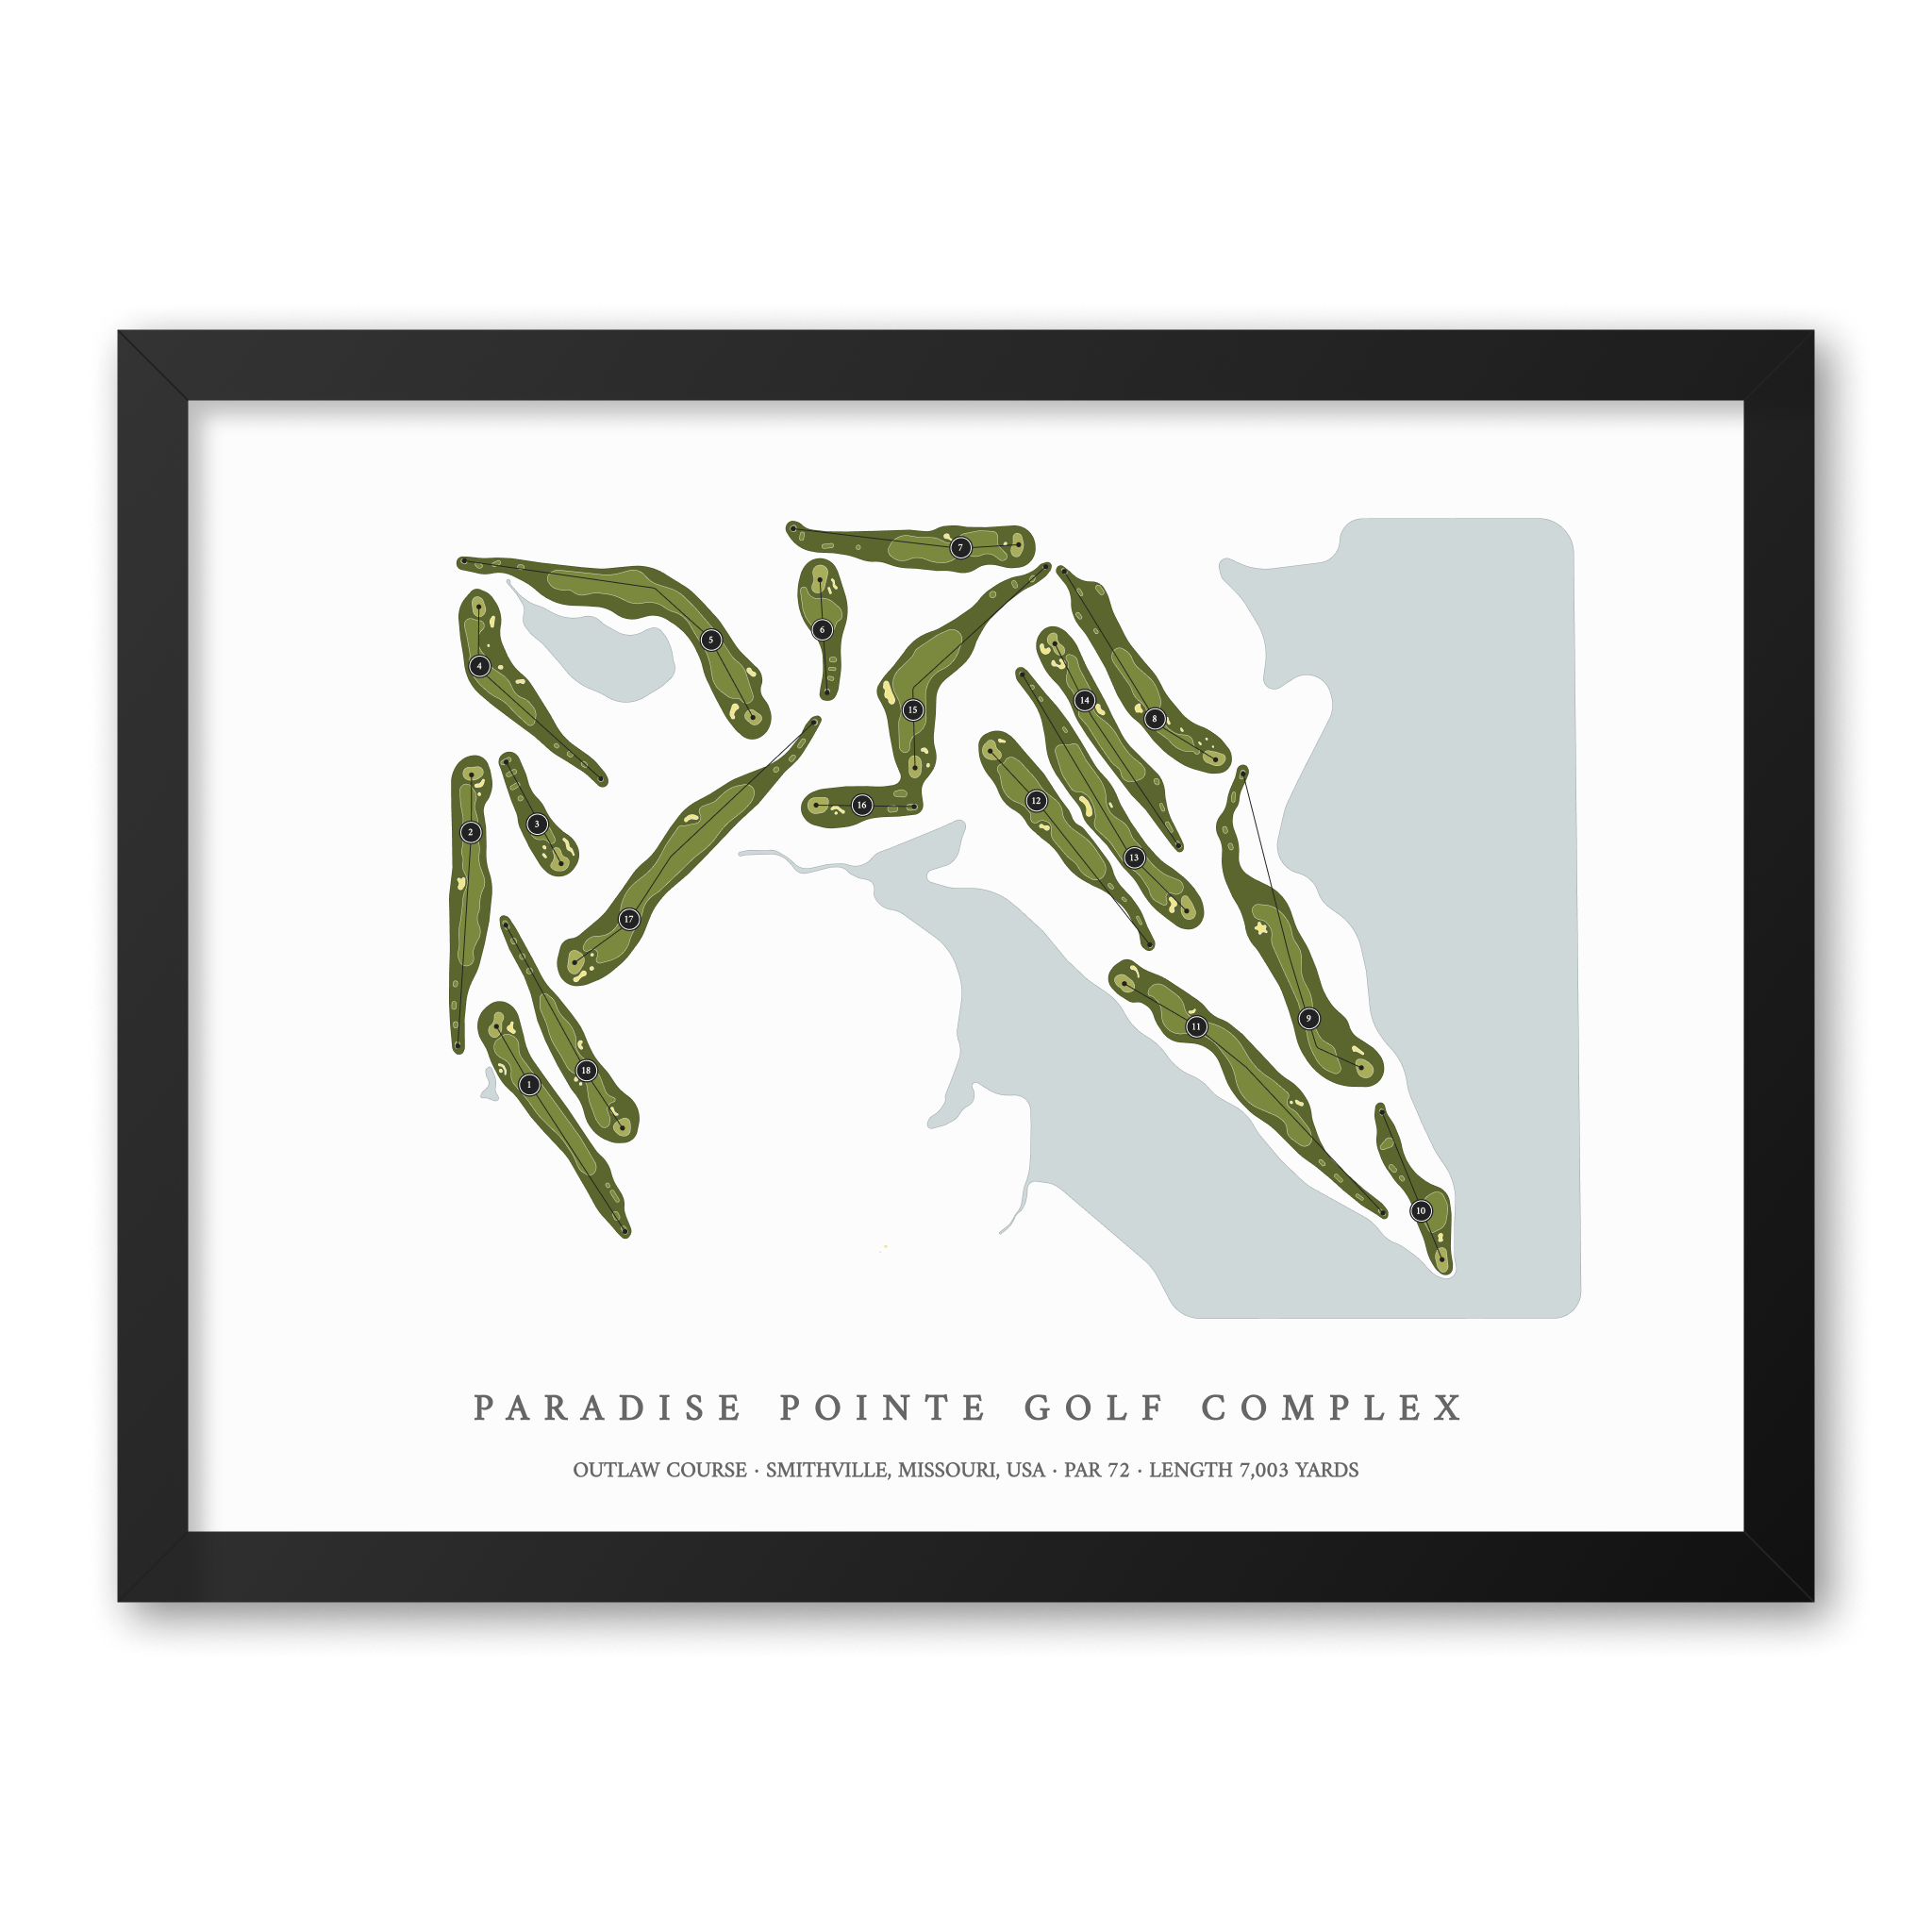 Paradise Pointe Golf Complex - Outlaw Course | Golf Course Map | Black Frame